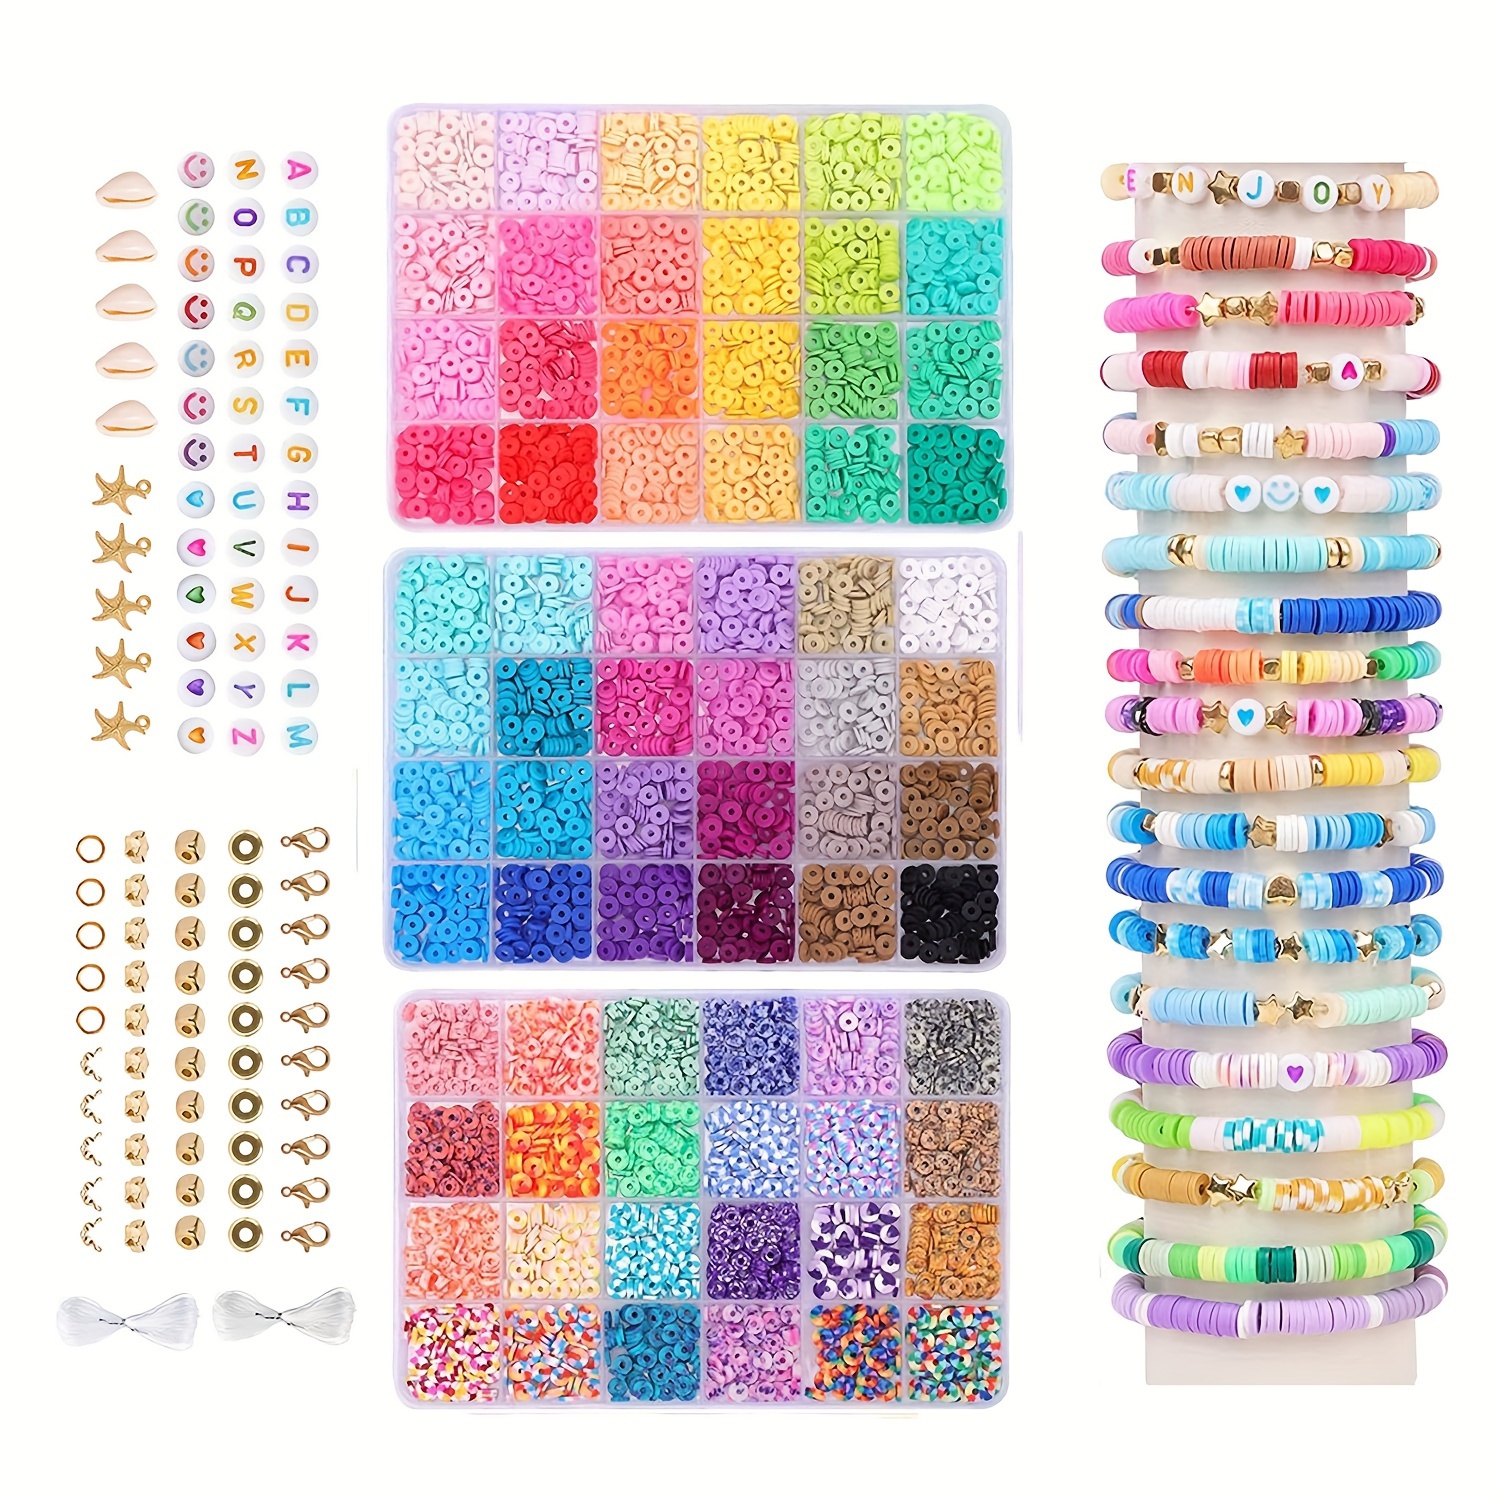 5100pcs Clay Beads Bracelet Making Kit, Preppy Spacer Flat Beads For  Jewelry Making, Polymer Beads With Charms And Elastic Strings For Birthday  Gifts